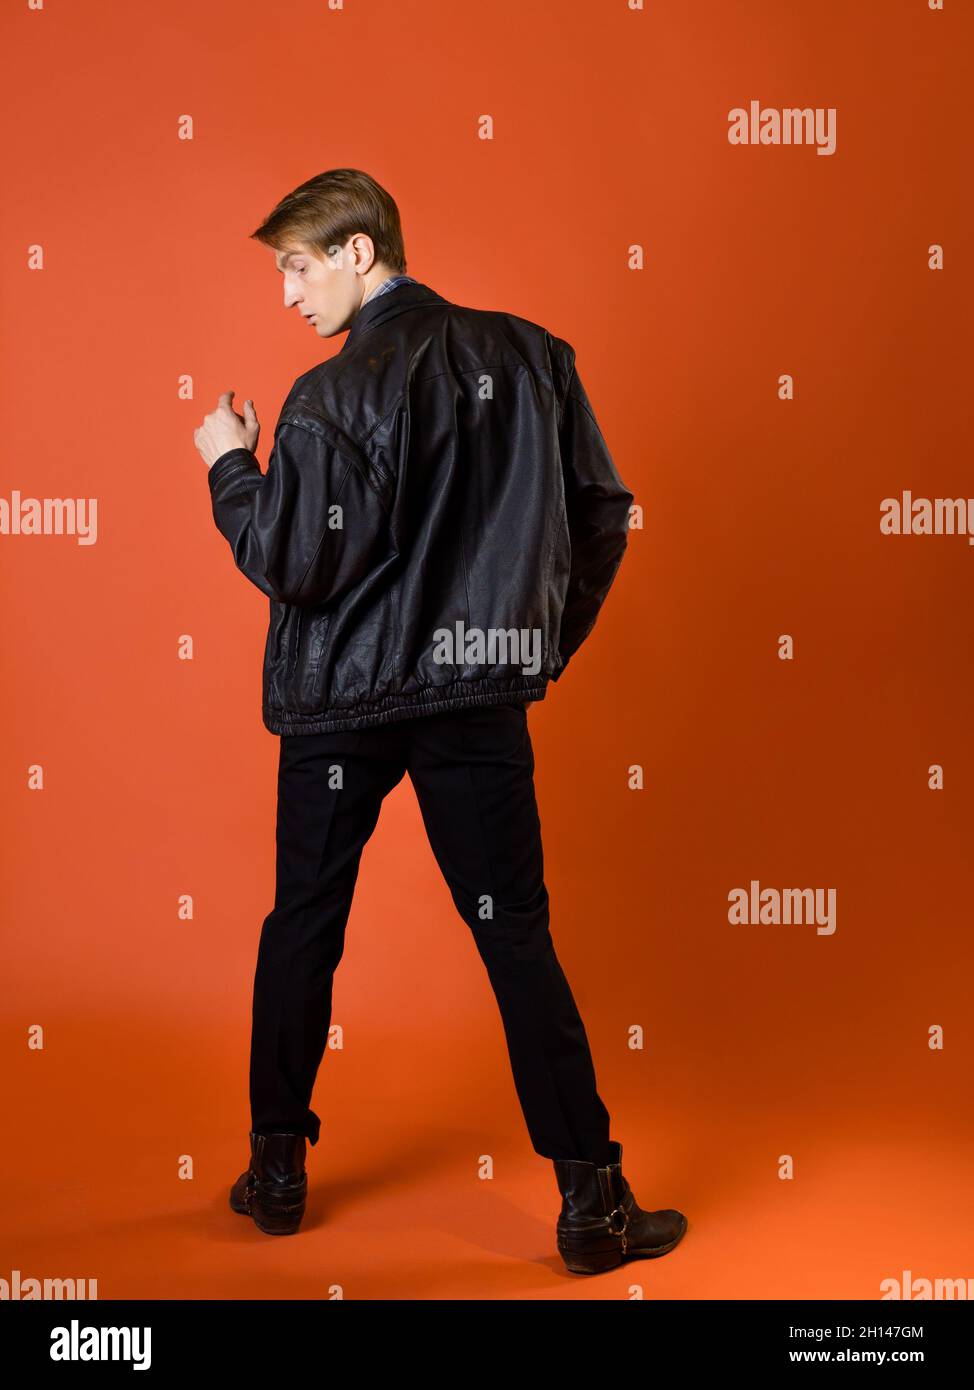 a guy in a casual plaid shirt and a leather jacket, studio photo on an orange background Stock Photo